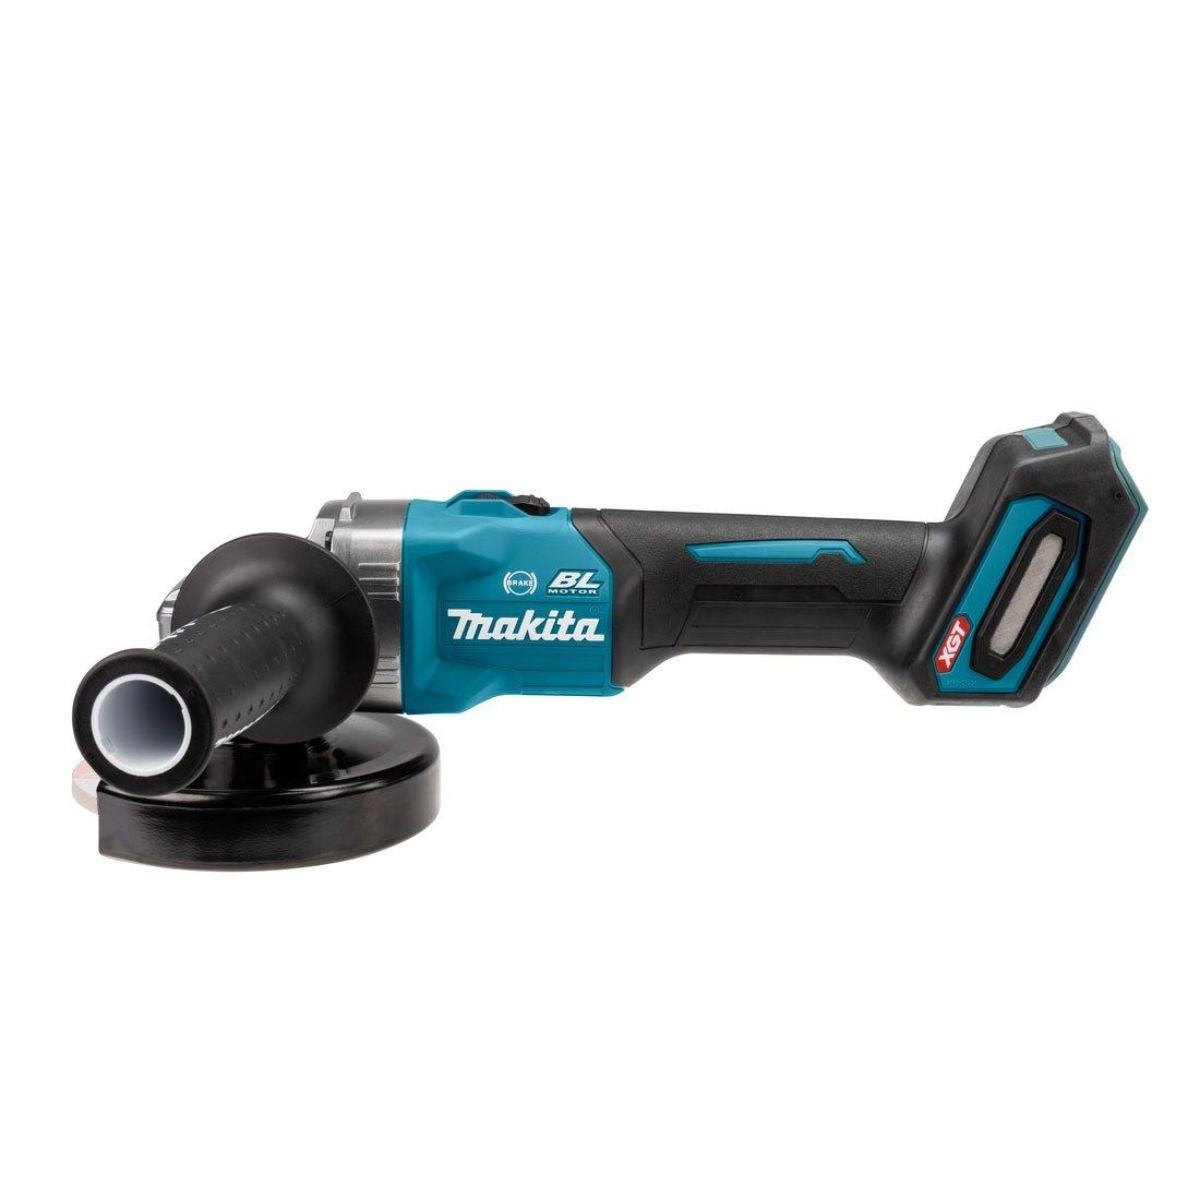 Makita GA005GZ01 40v Max XGT 125mm Brushless Angle Grinder Body Only With Carry Case